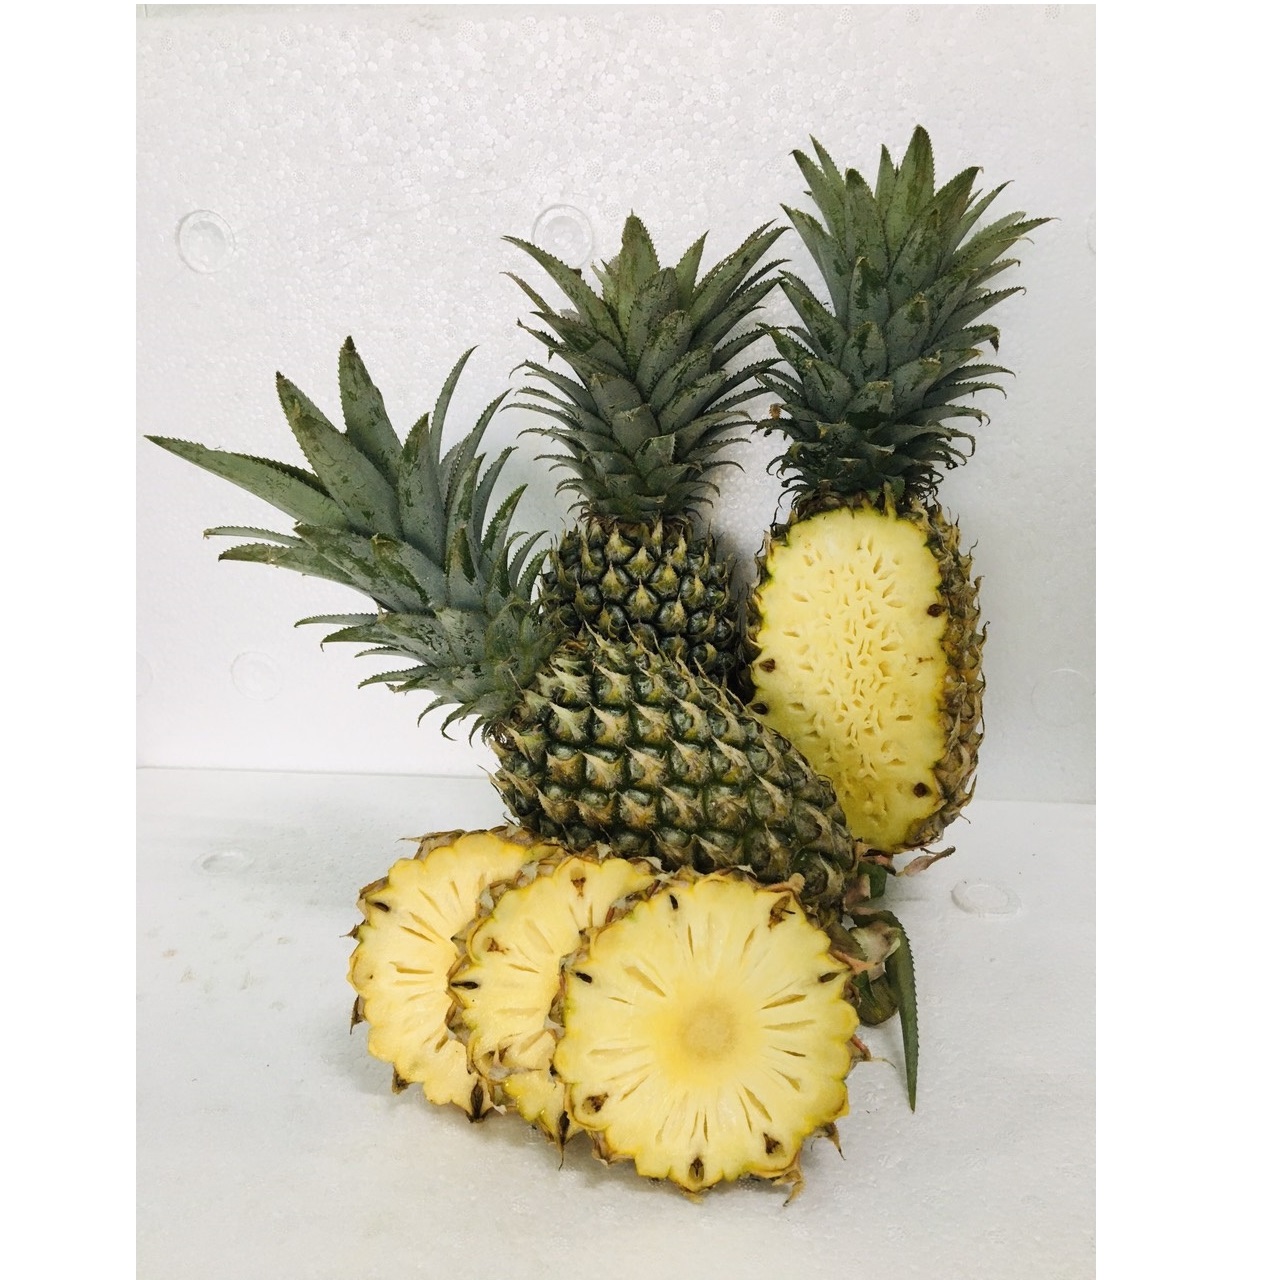 PREMIUM Tropical & Sub-tropical Organic Fresh Sweet Ananas/Pineapples Fruit With 30 Days Shelf Life Exported From Vietnam